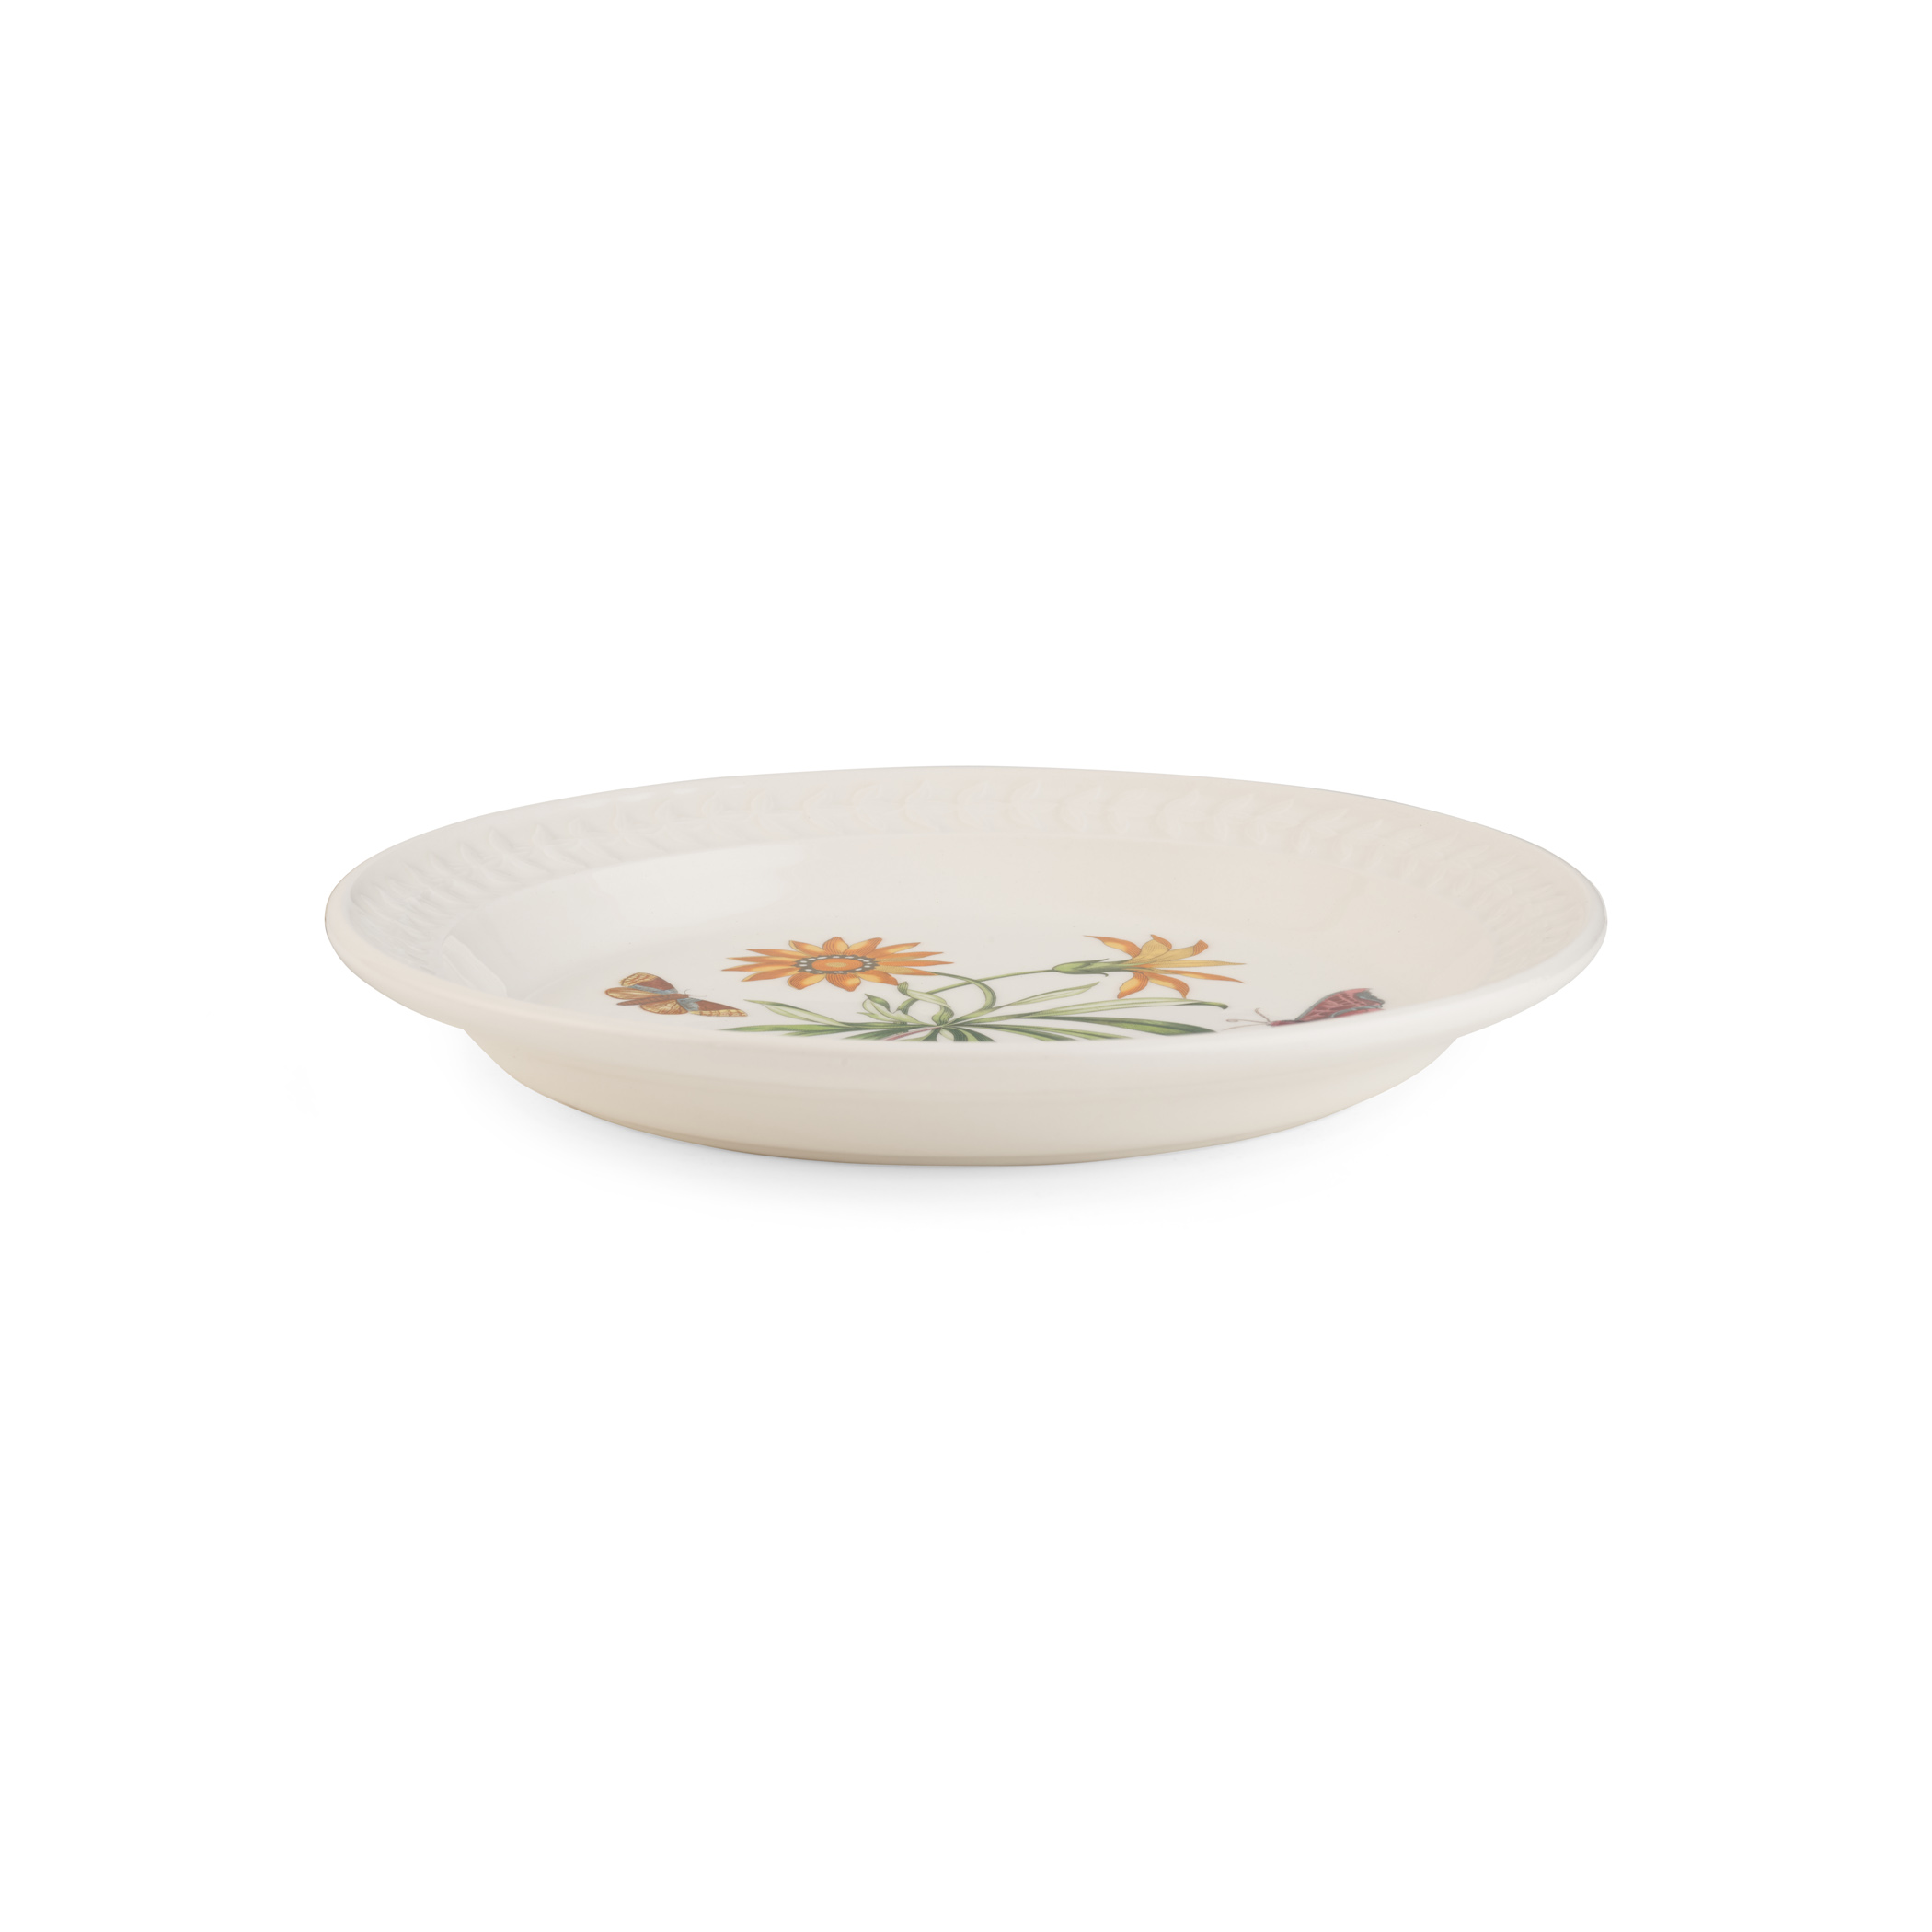 Botanic Garden Harmony Papilio Opal 8.5 Inch Salad Plate (African Daisy) image number null